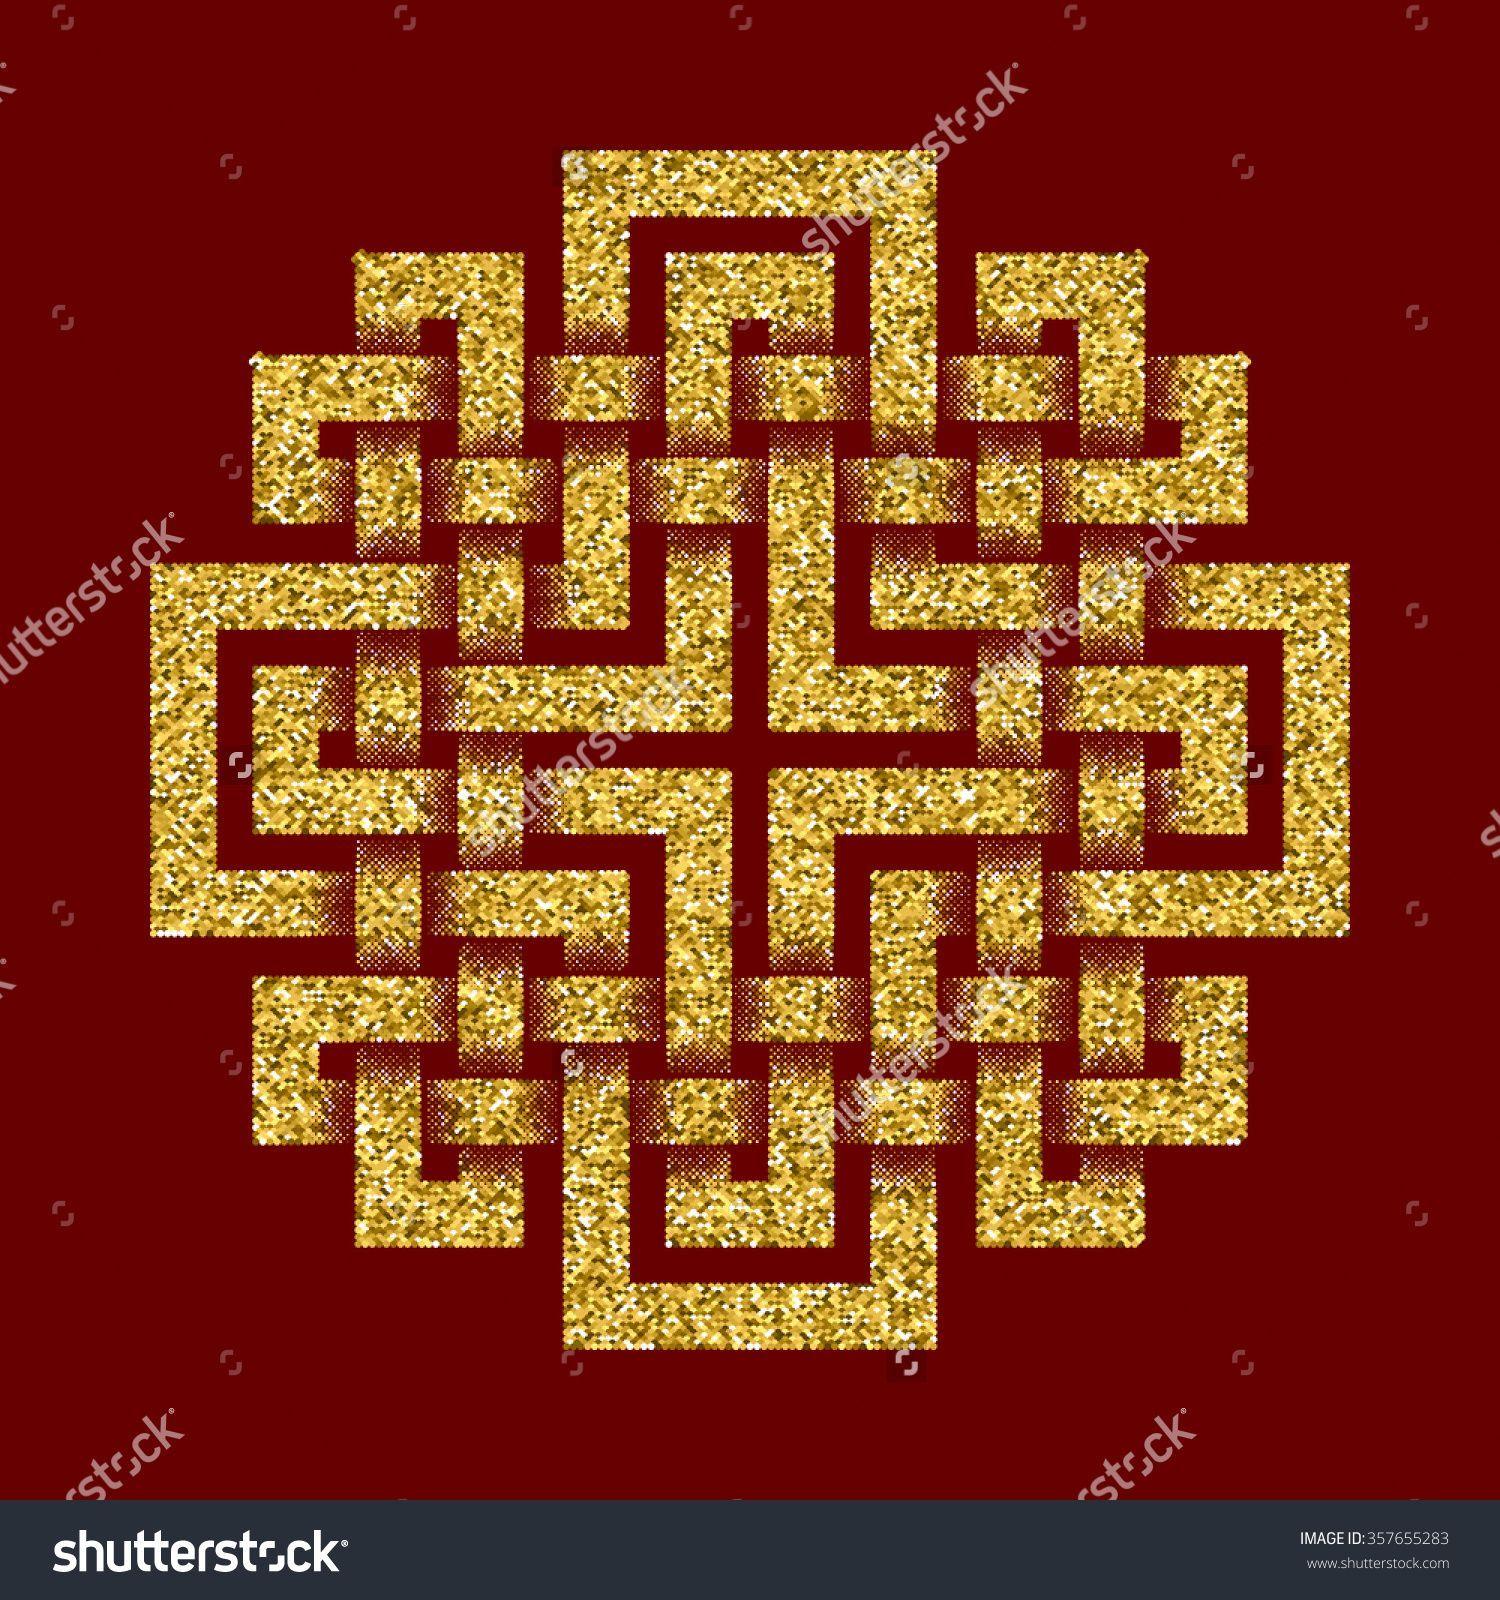 Cross Red Background Logo - Golden glittering #logo template in #Celtic knots style on dark red